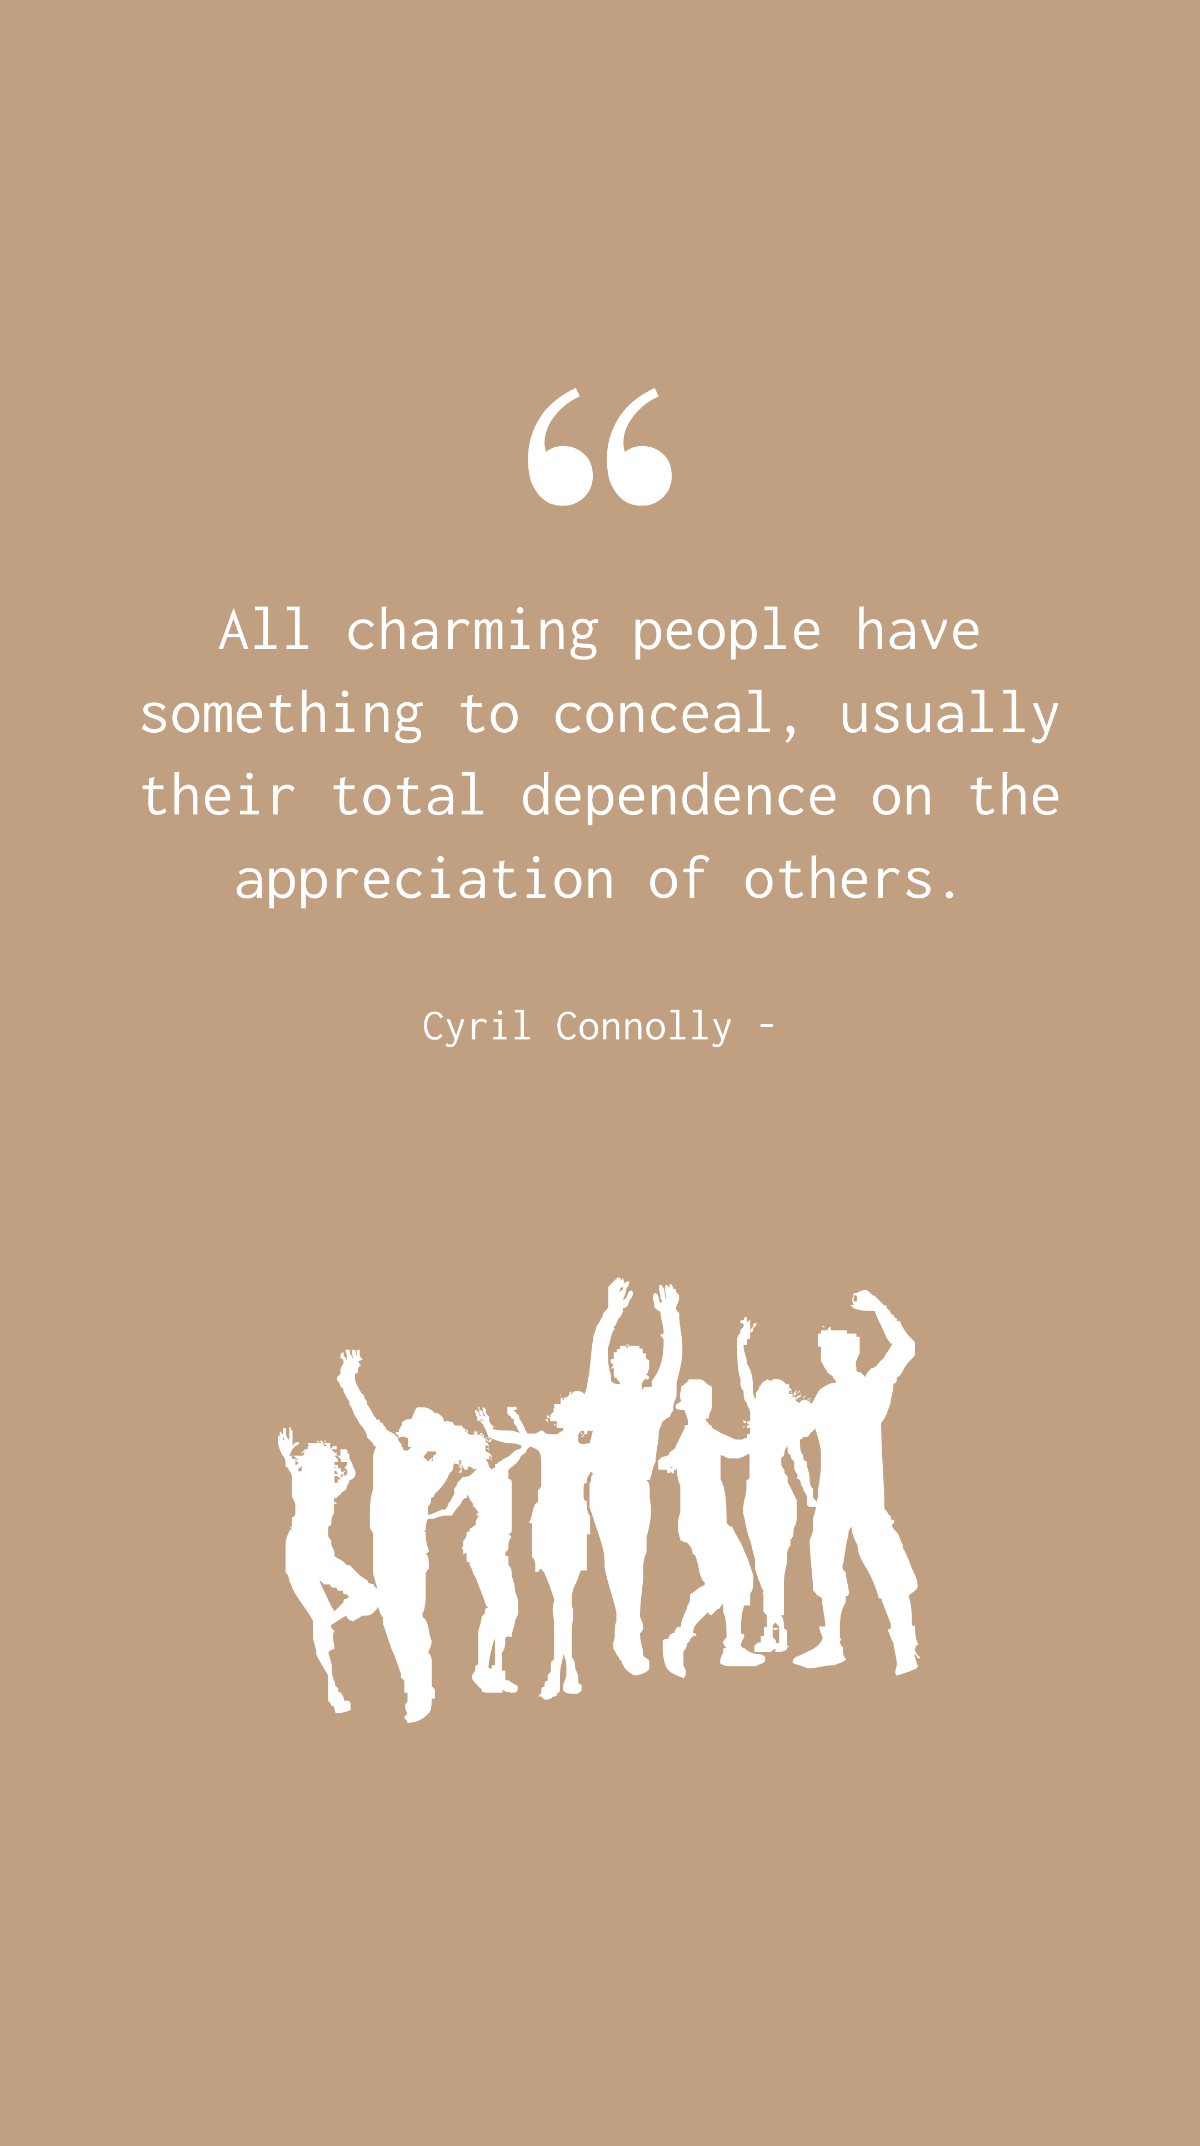 Free Cyril Connolly - All charming people have something to conceal, usually their total dependence on the appreciation of others. Template